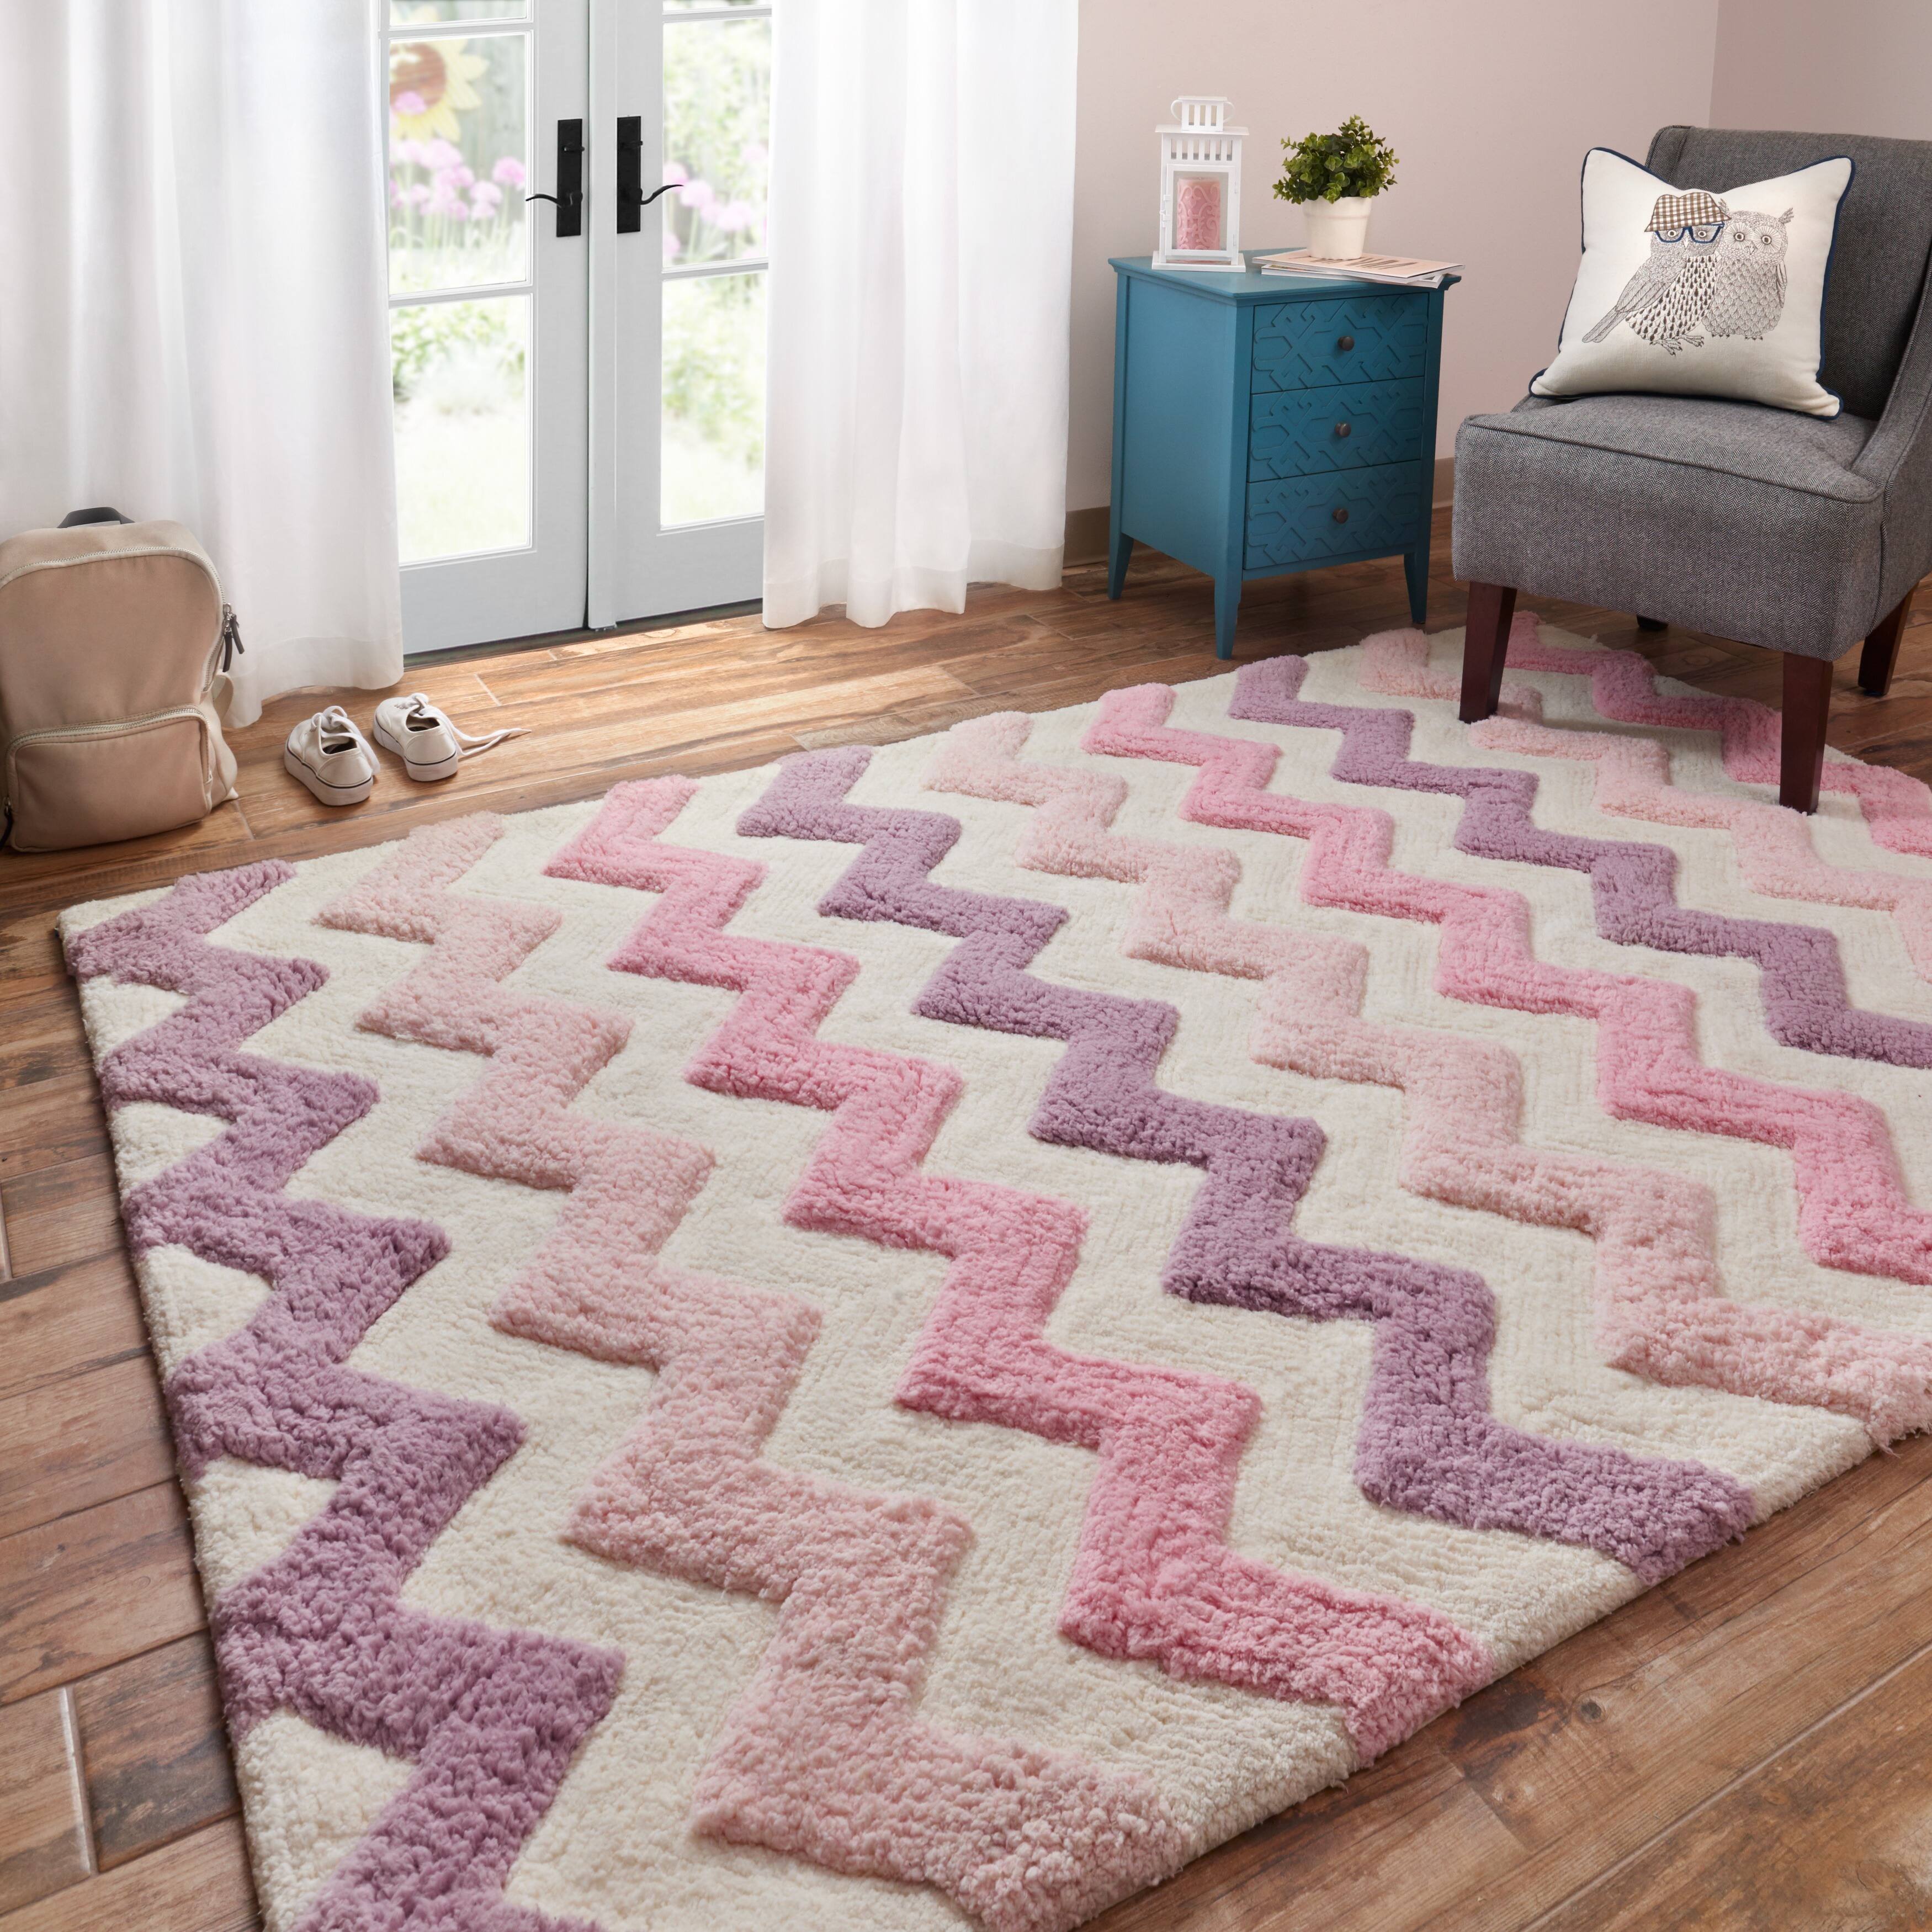 Buy 5x8 - 6x9 Rugs Online at Overstock.com | Our Best Area Rugs Deals